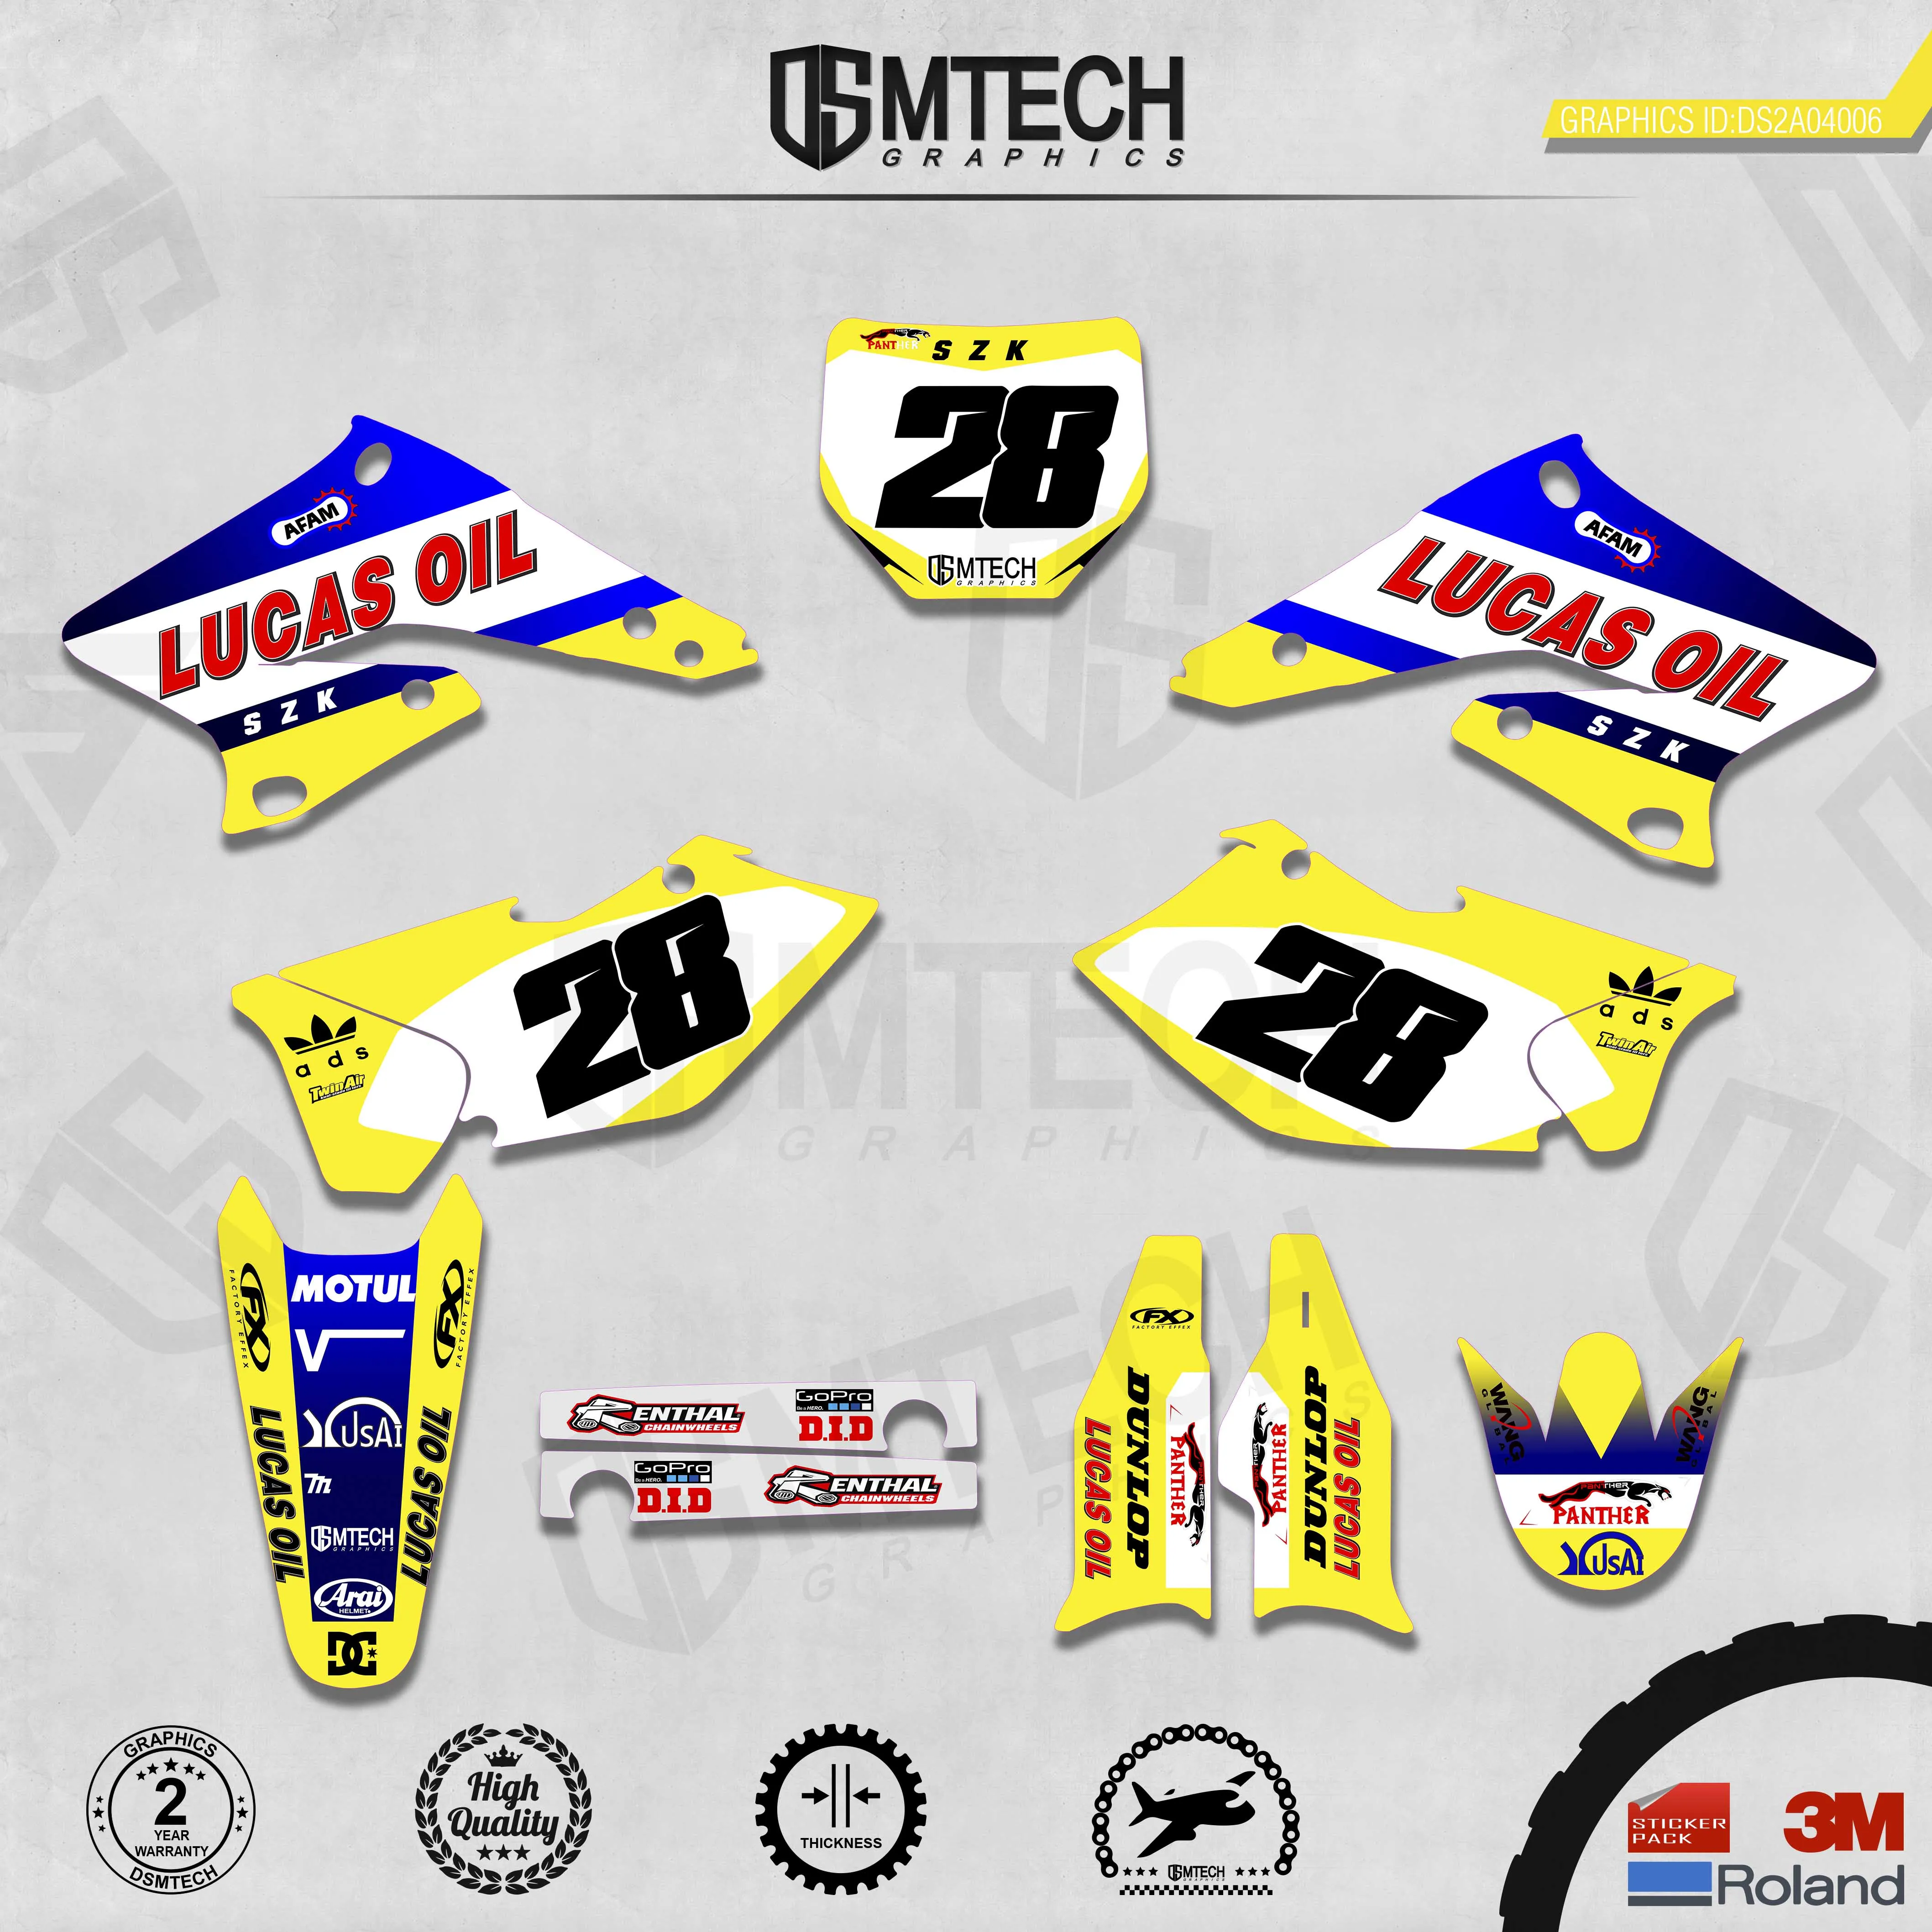 DSMTECH Customized Team Graphics Backgrounds Decals 3M Custom Stickers For 2004-2006 RMZ250  006